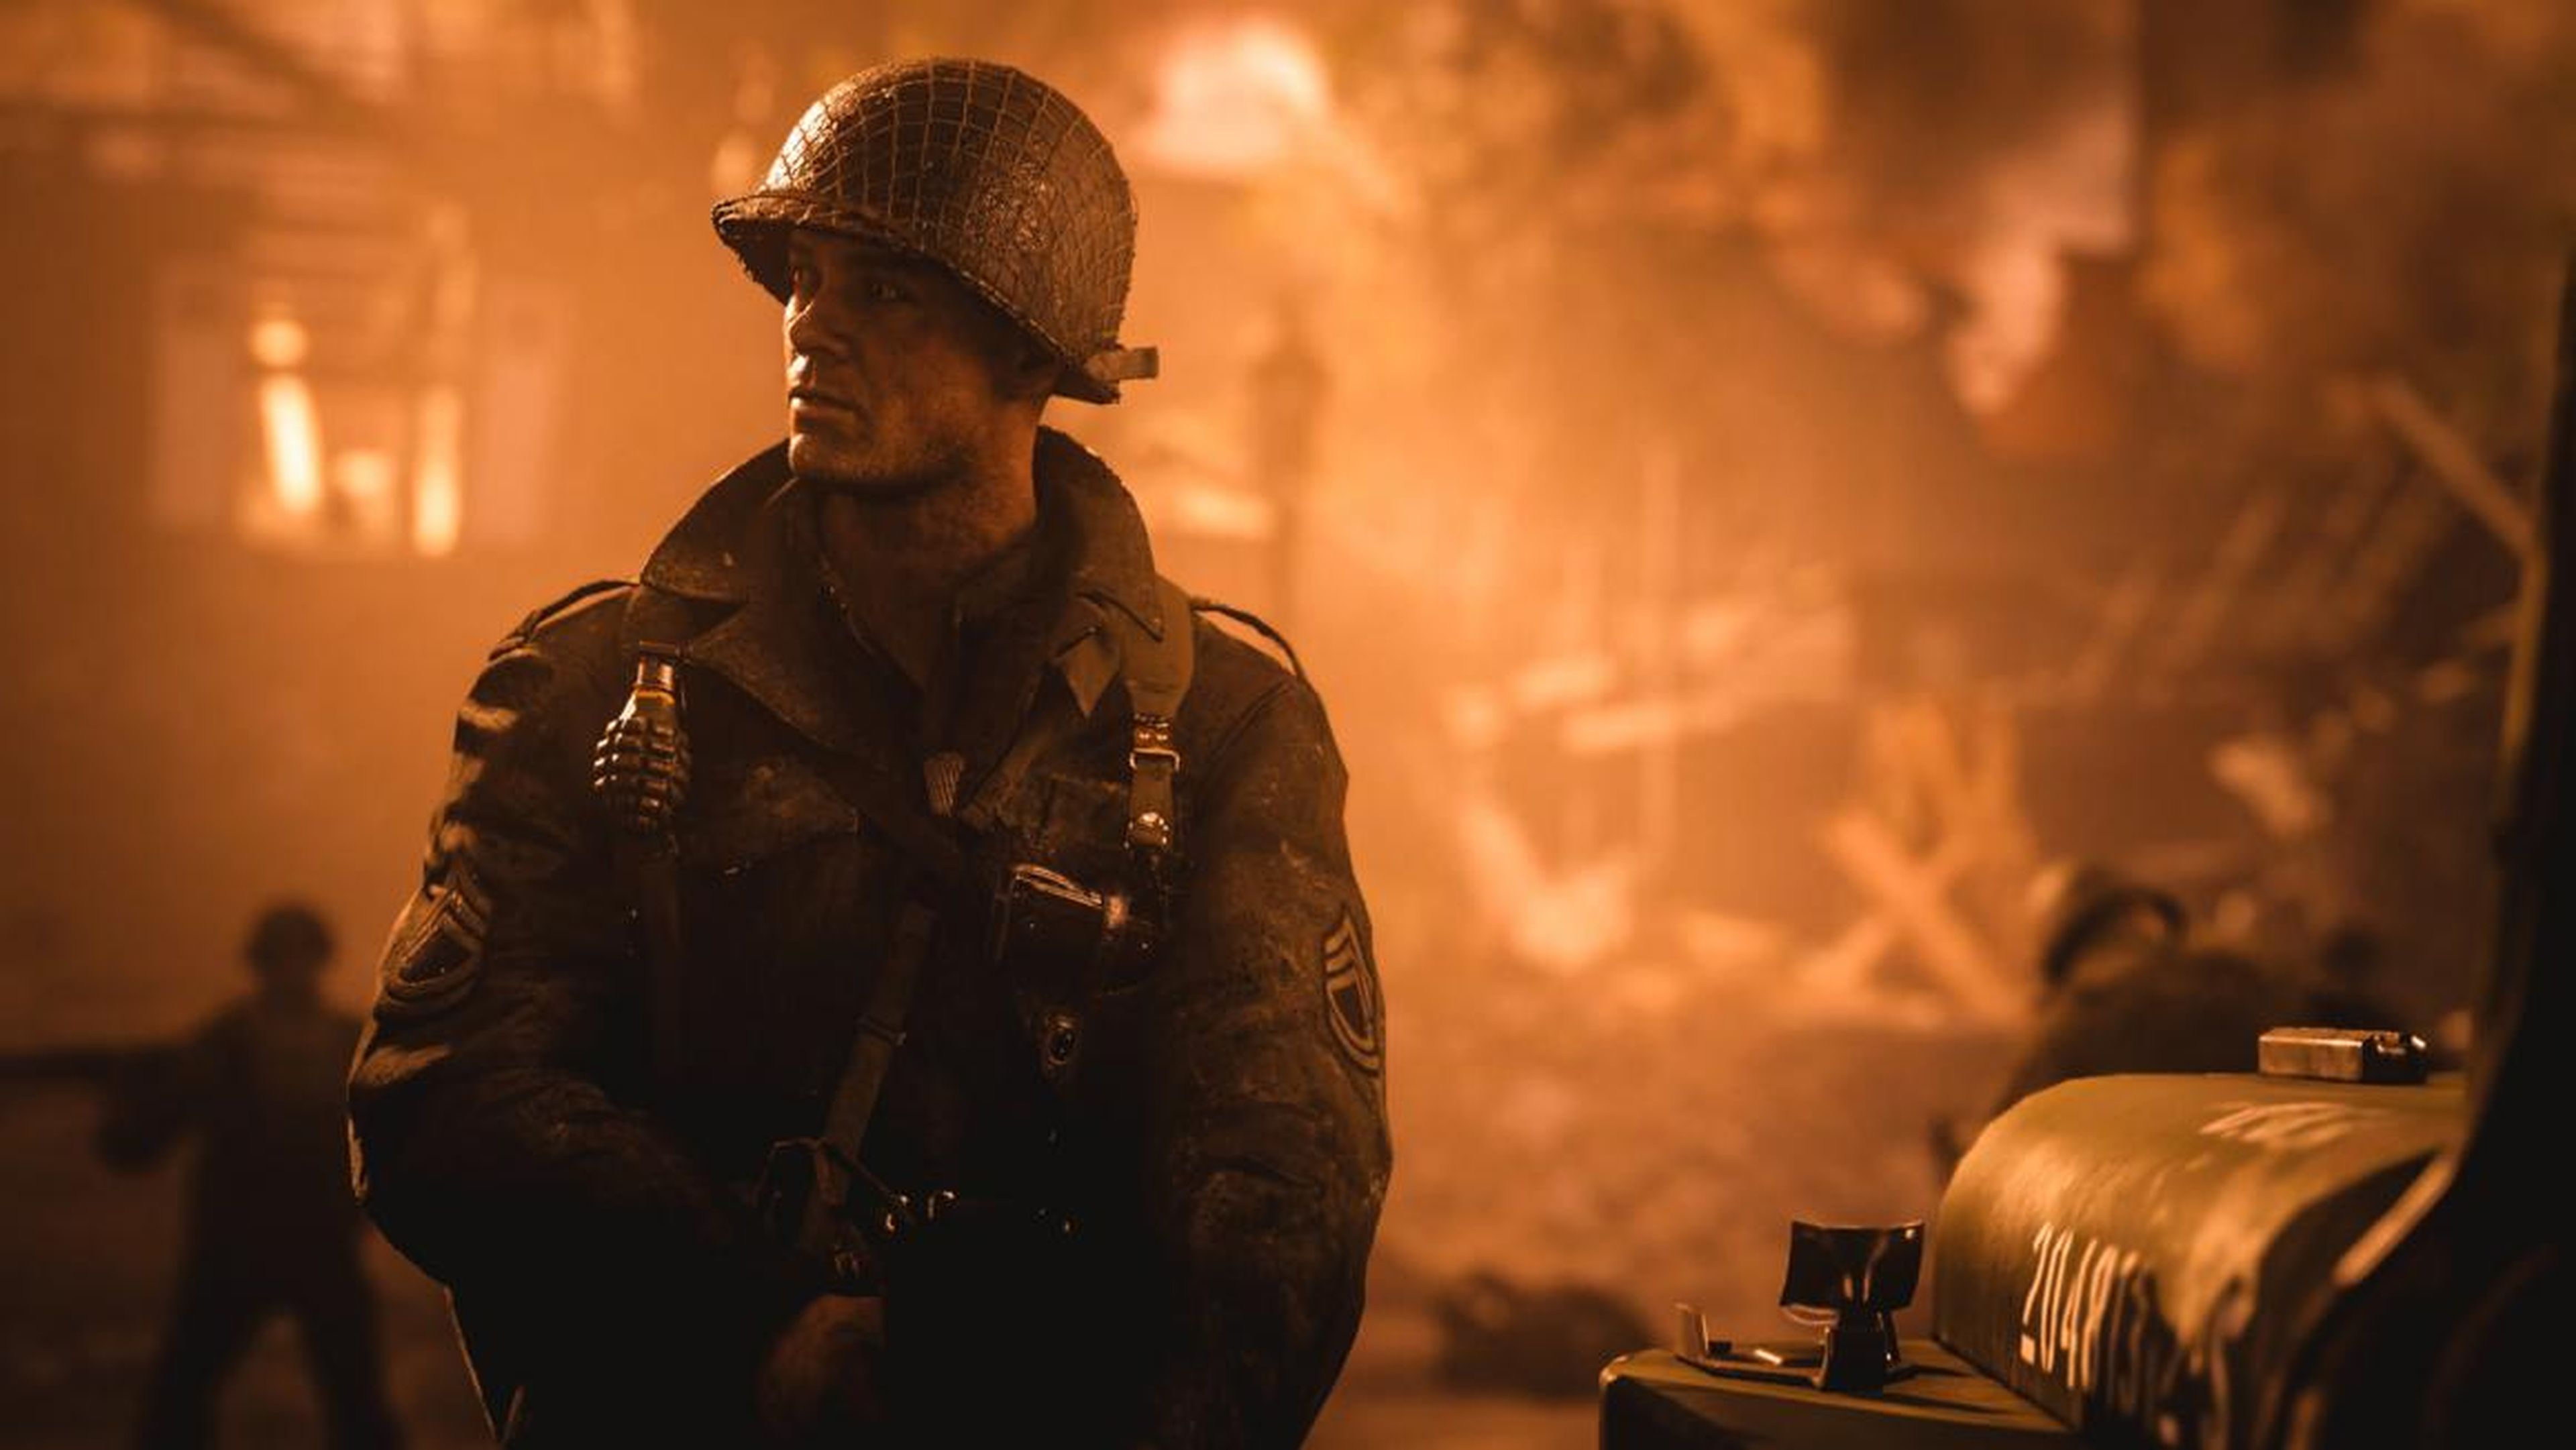 2017 — "Call of Duty: WWII" (PlayStation 4, Xbox One, PC)